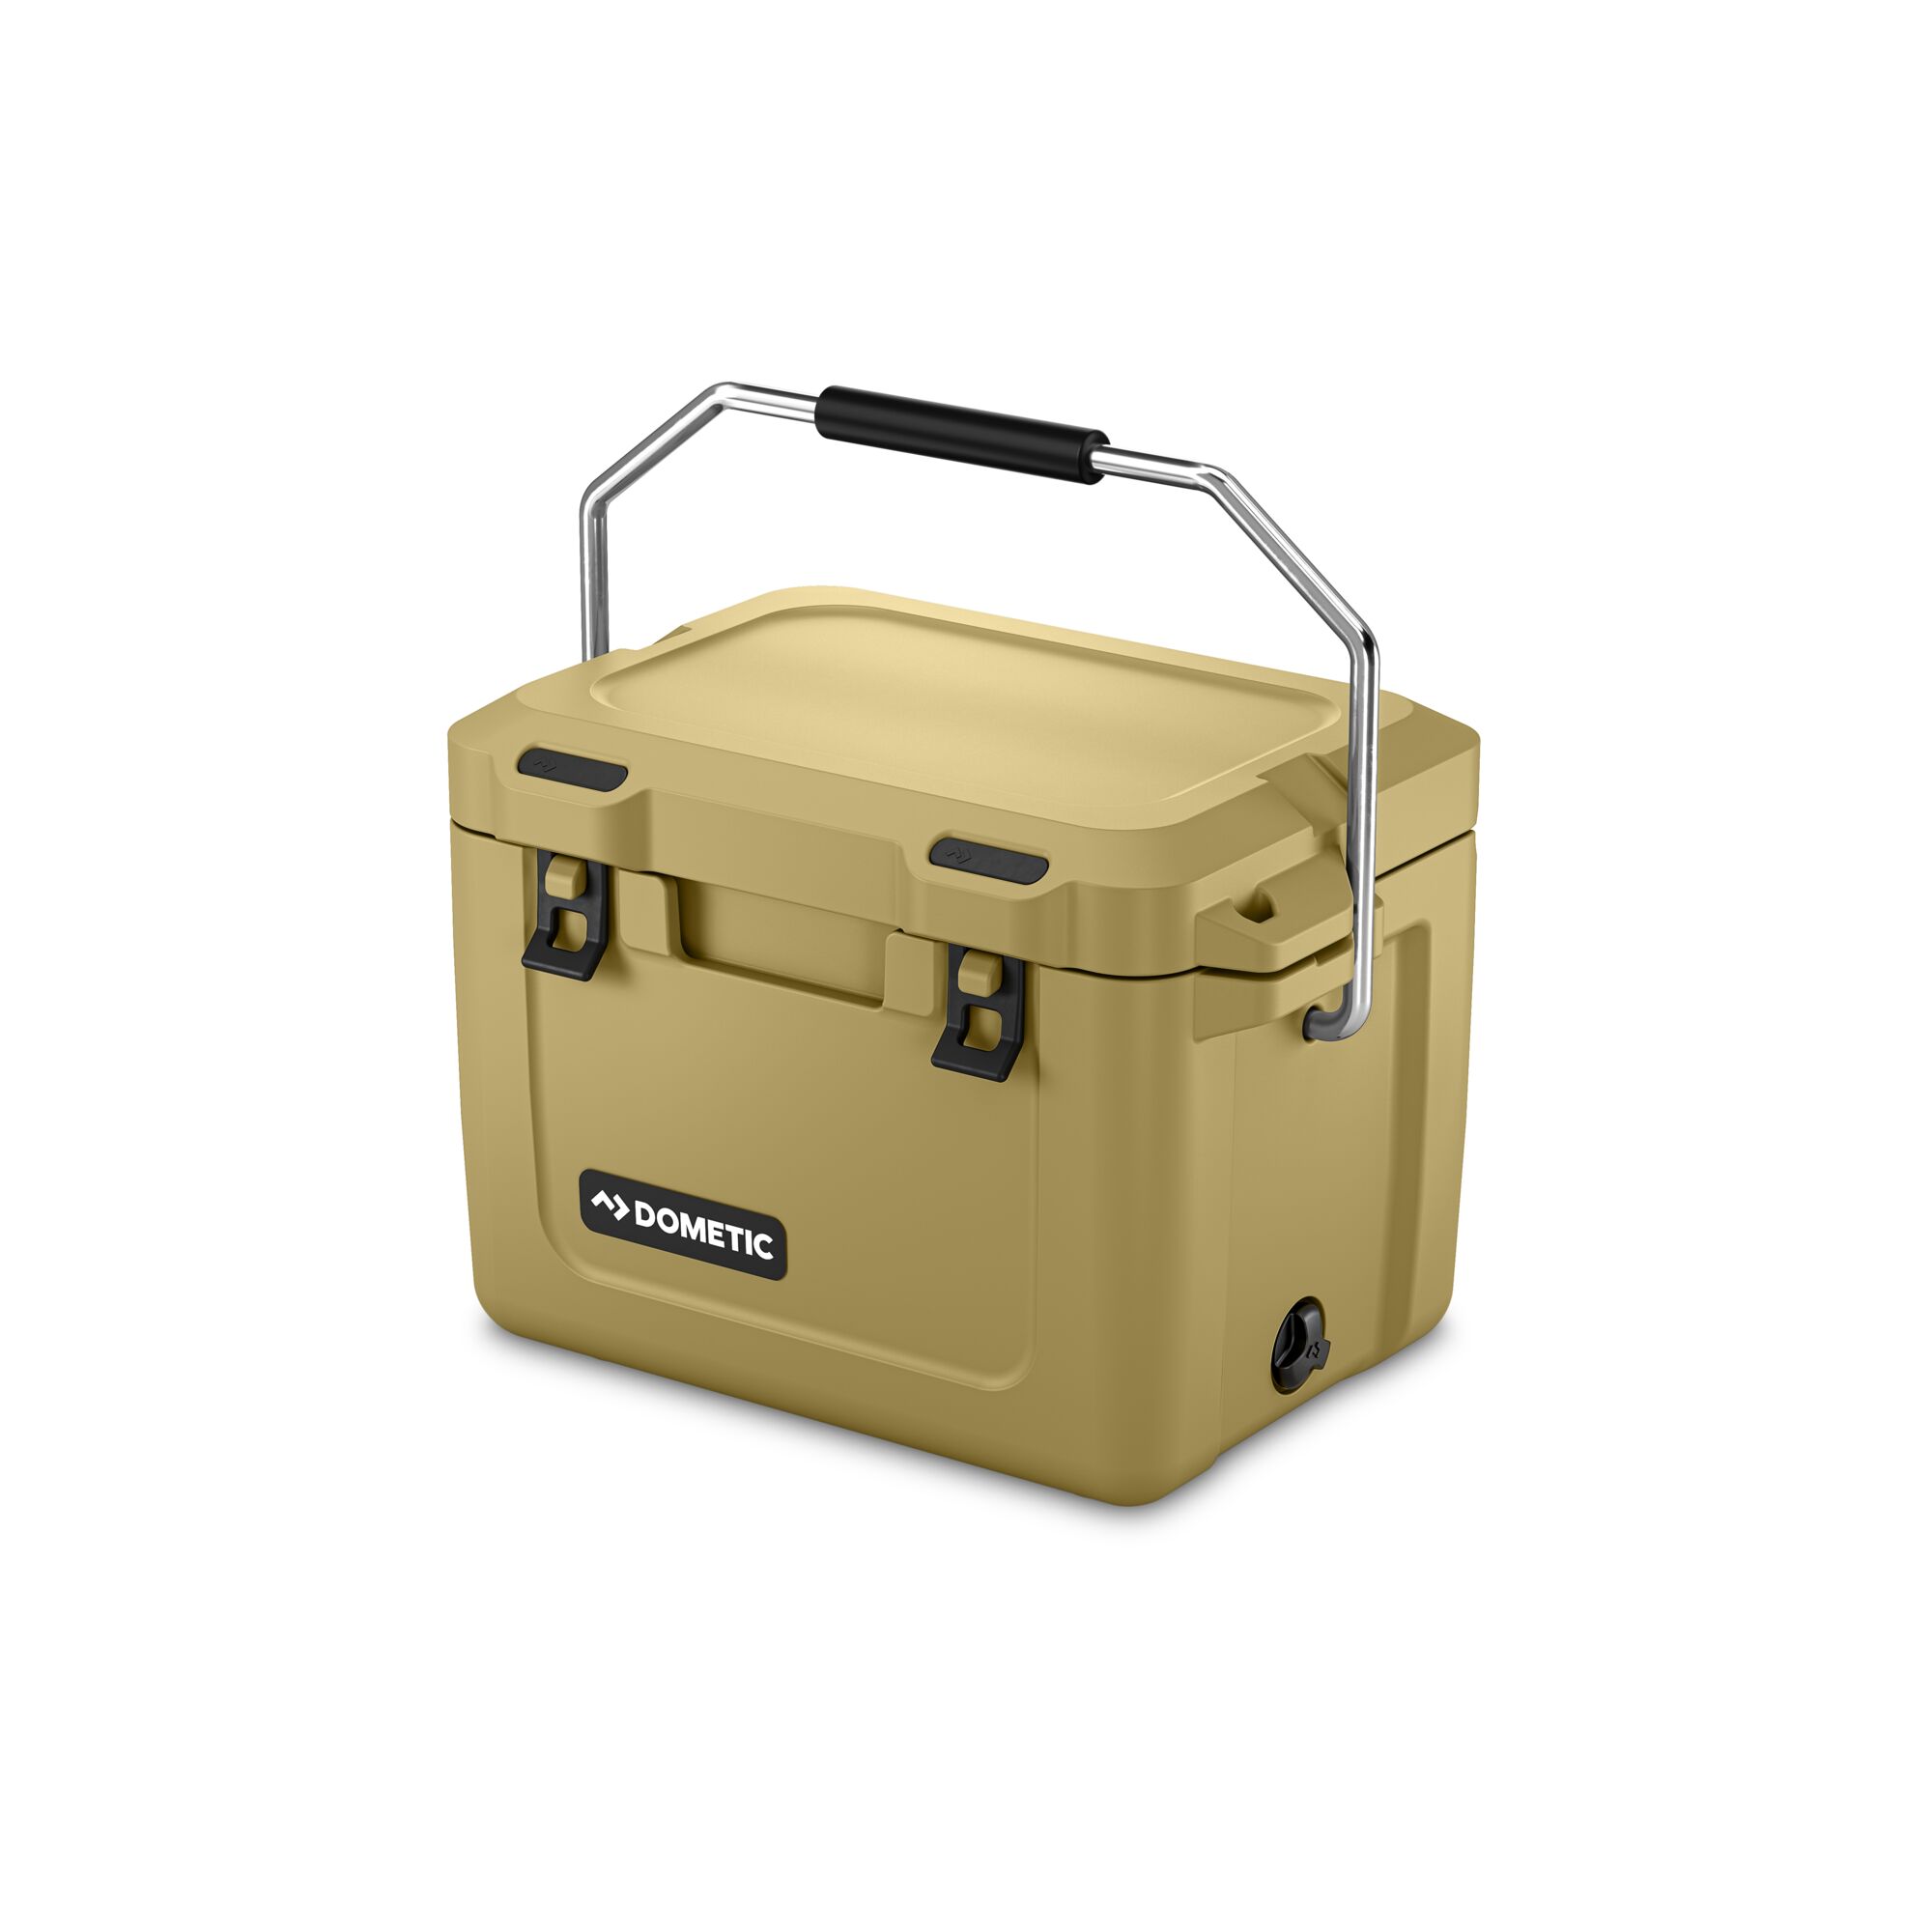 Dometic Patrol 20 - Insulated ice chest, 18.8 l, Olive